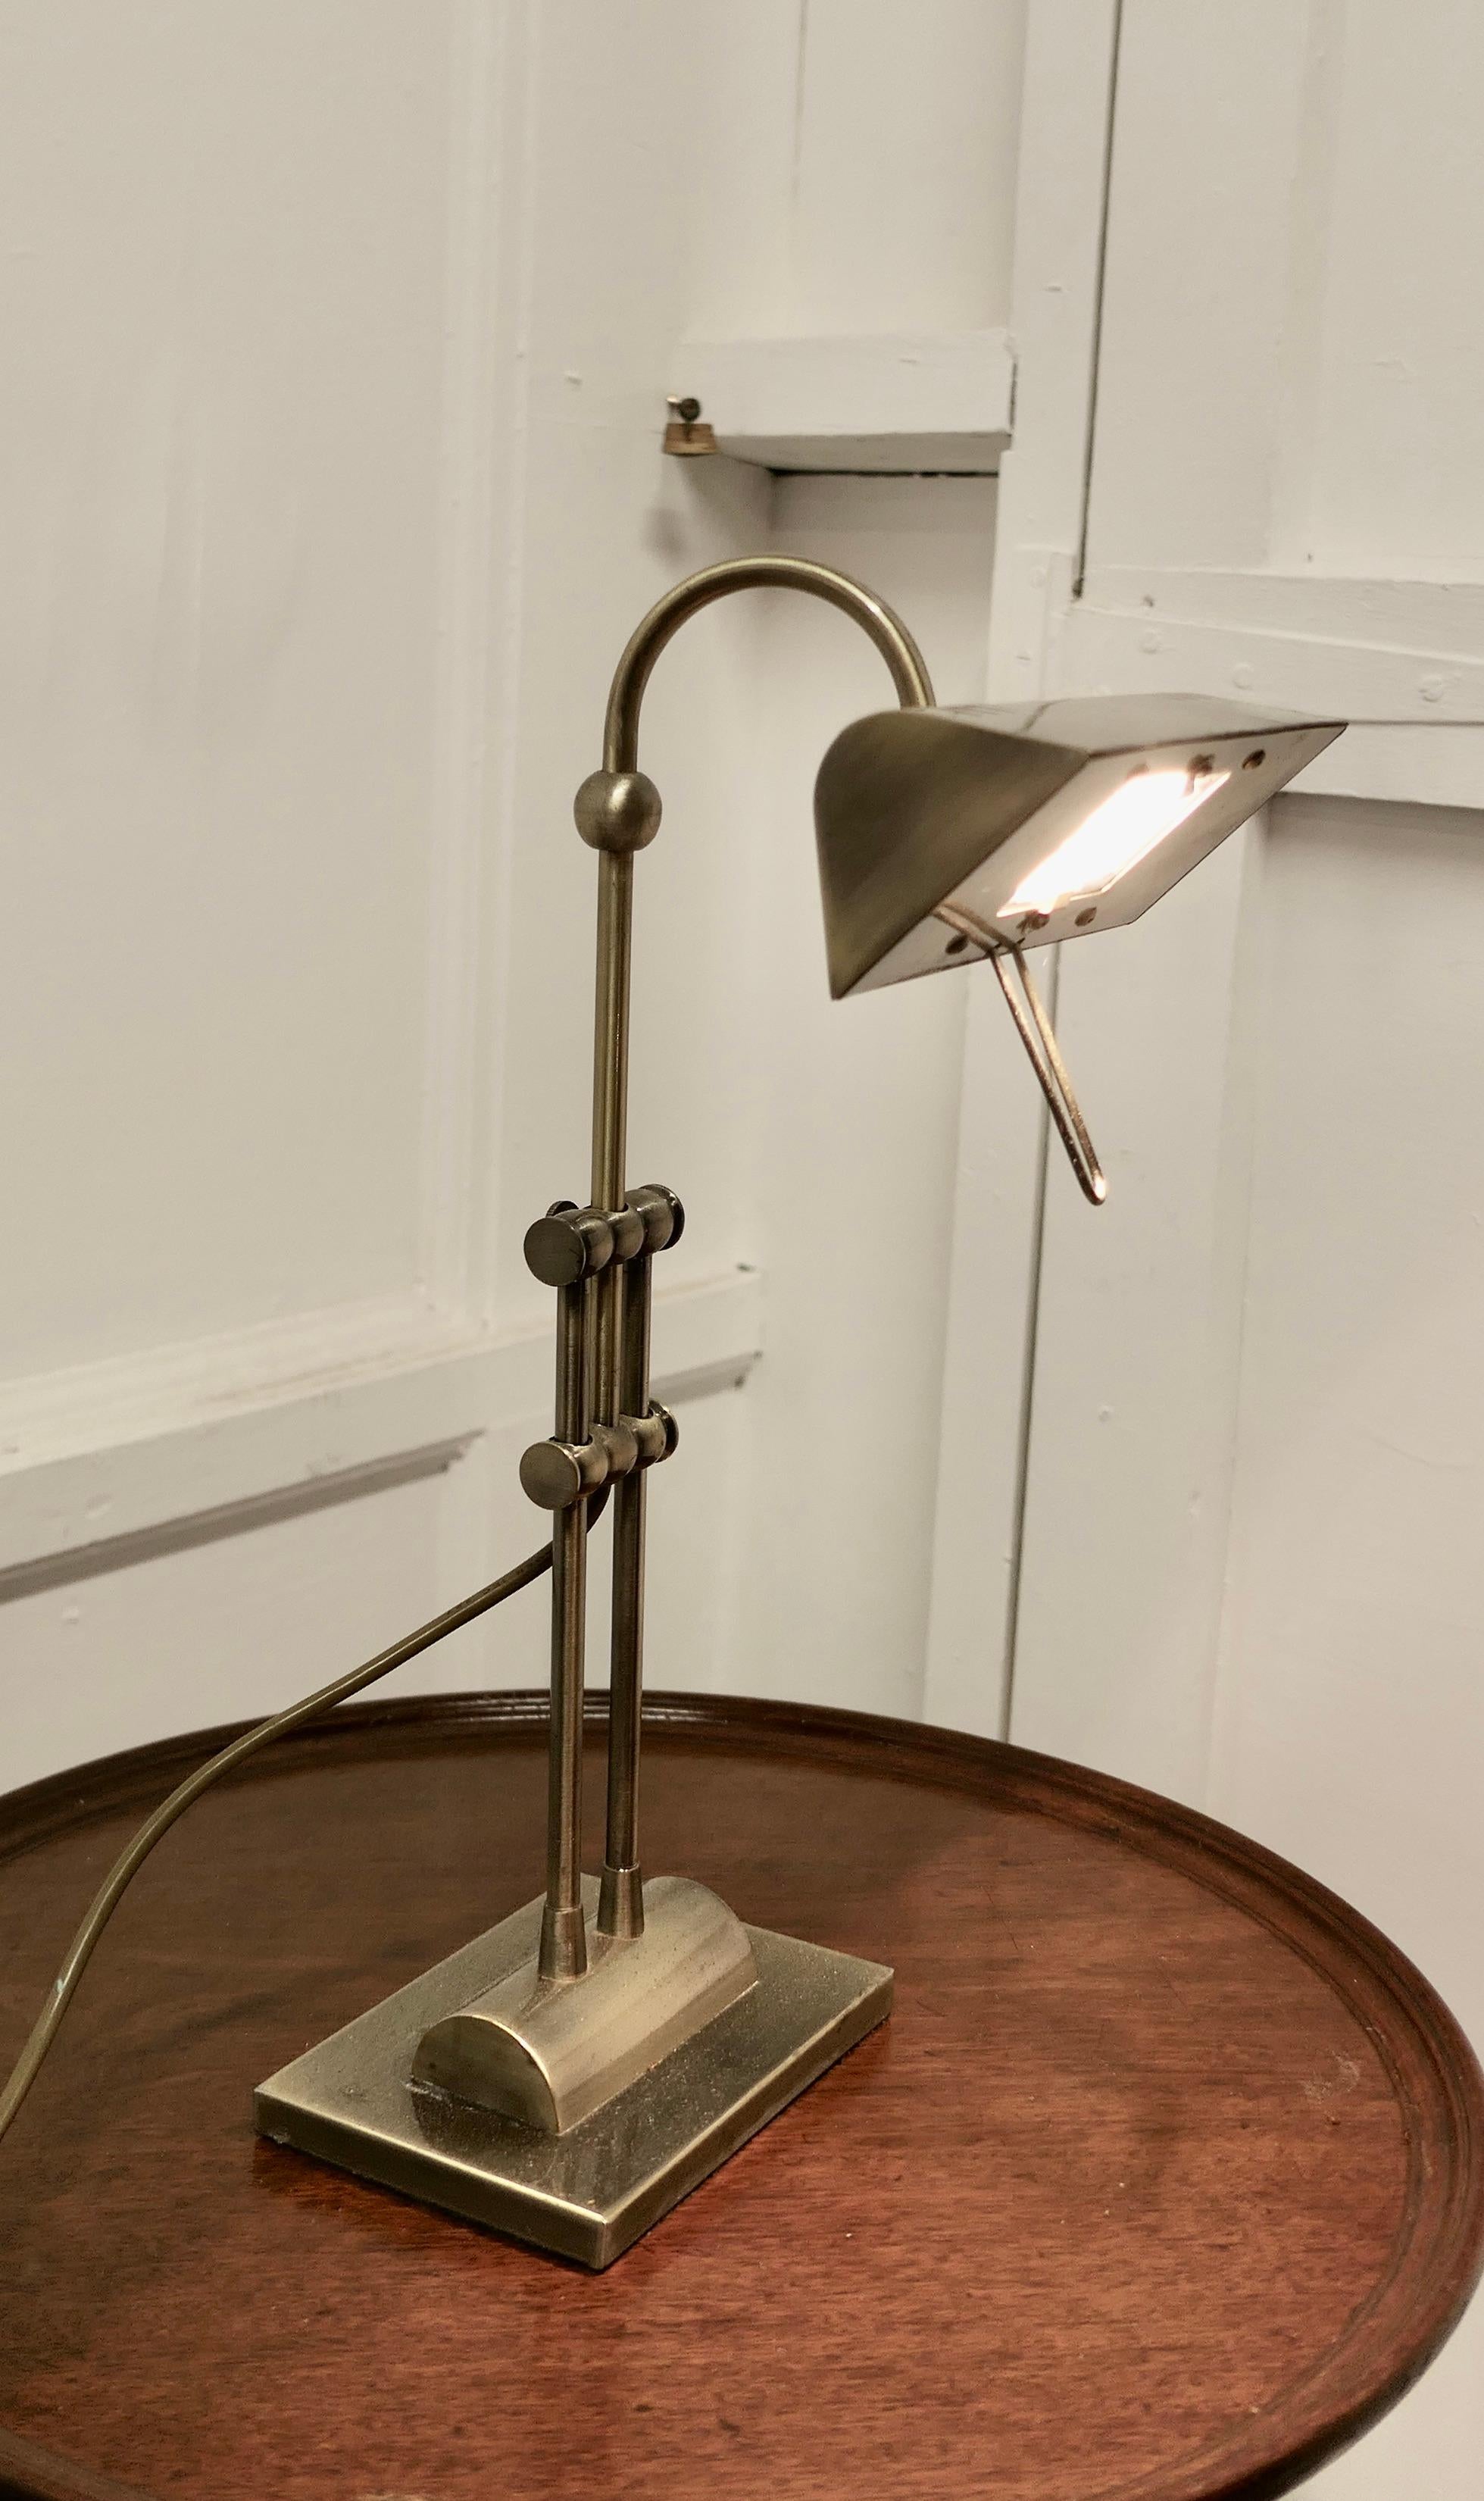 Retro brass adjustable bankers’s desk lamp. 

This is an attractive piece, the lamp is heavy, it has a rectangular brass base which supports the supporting arm, this alters the angle and height of the lamp.
The lamp has recent wiring and is fully